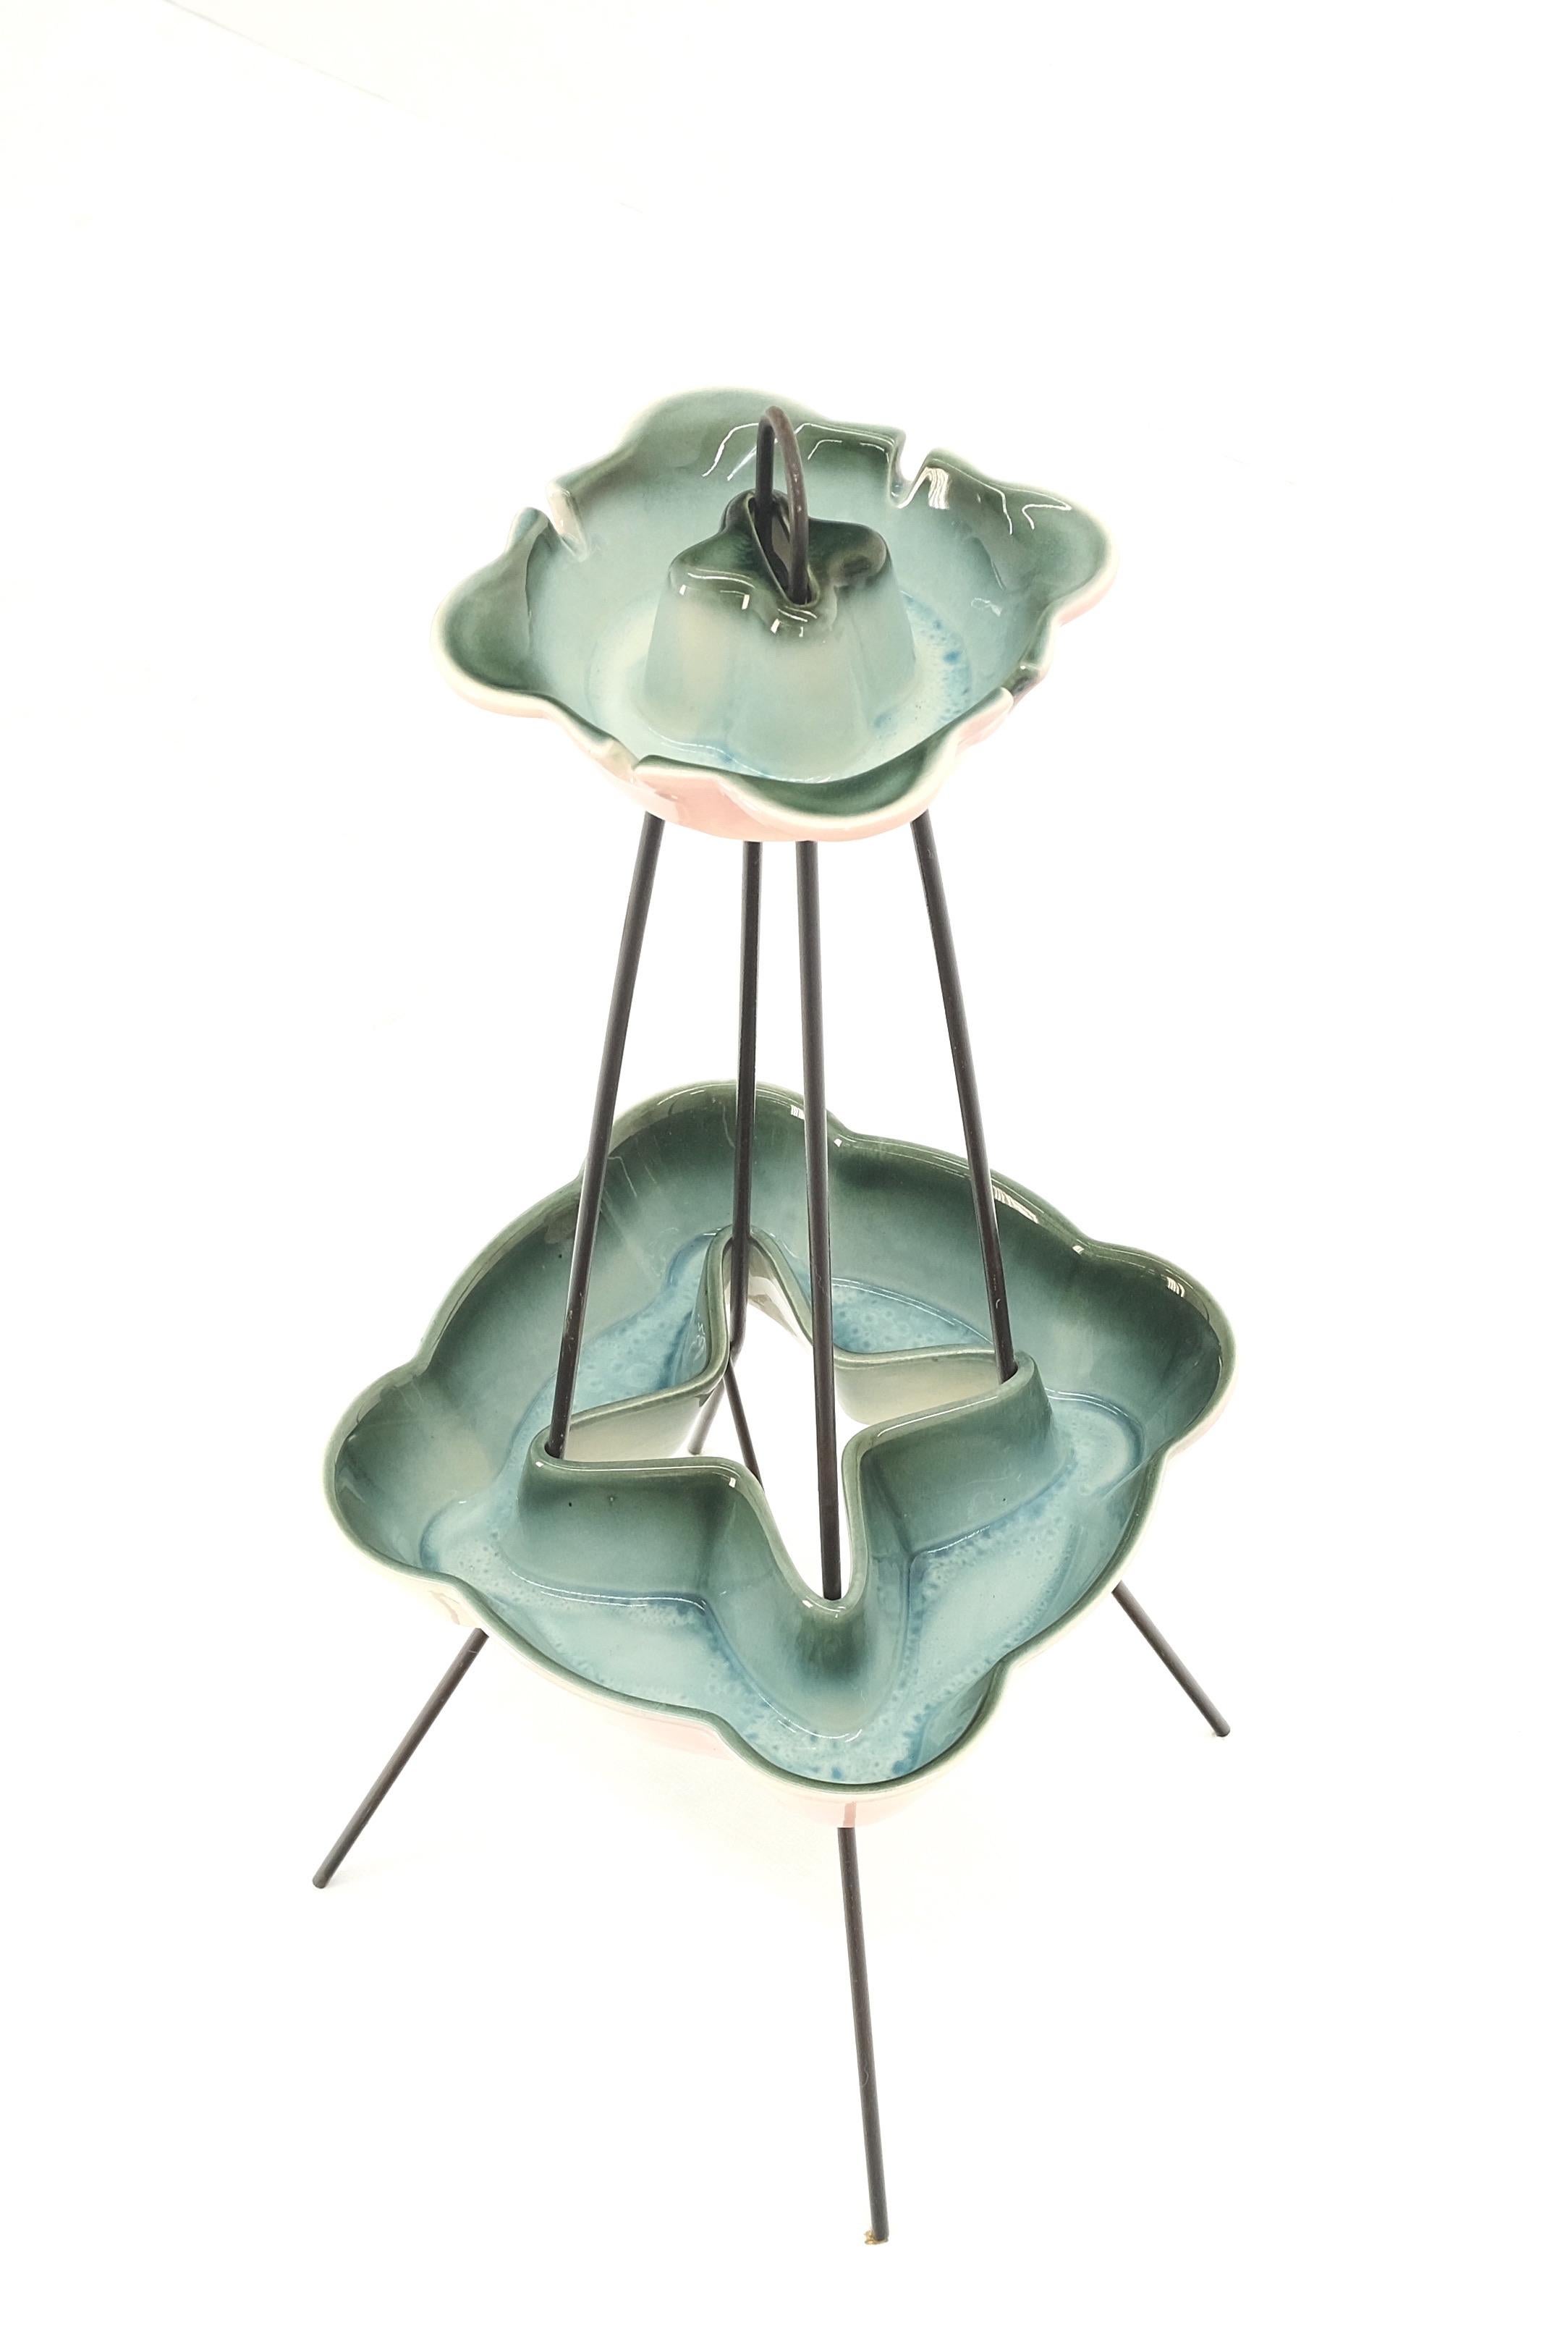 20th Century c.1950's Ceramic Pottery & Wire Base Floor Standing 2 Tier Ashtray  For Sale